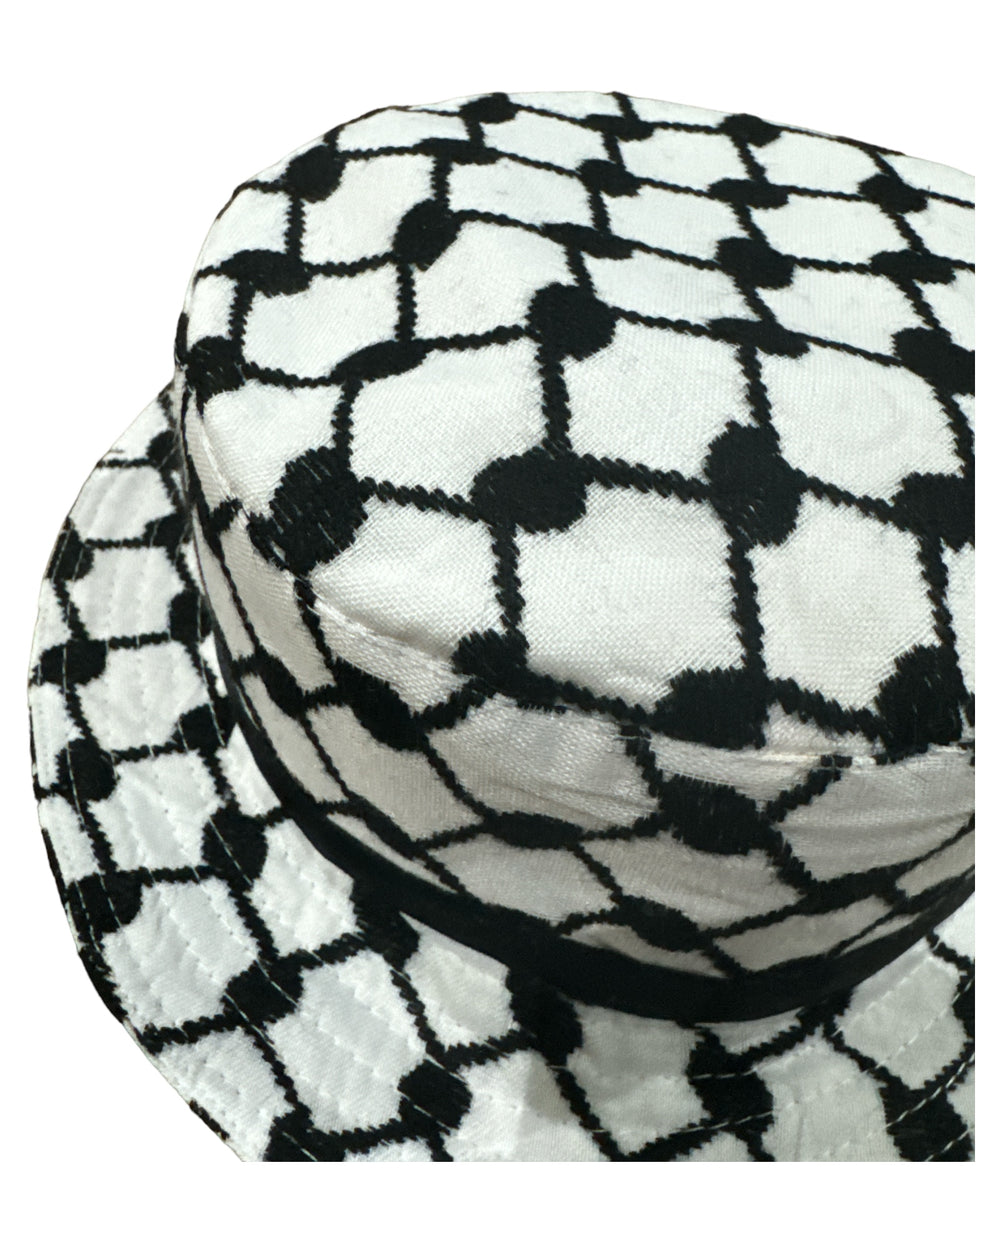 Authentic Keffiyeh Bucket Hats: Tradition Meets Trend (HAND MADE)